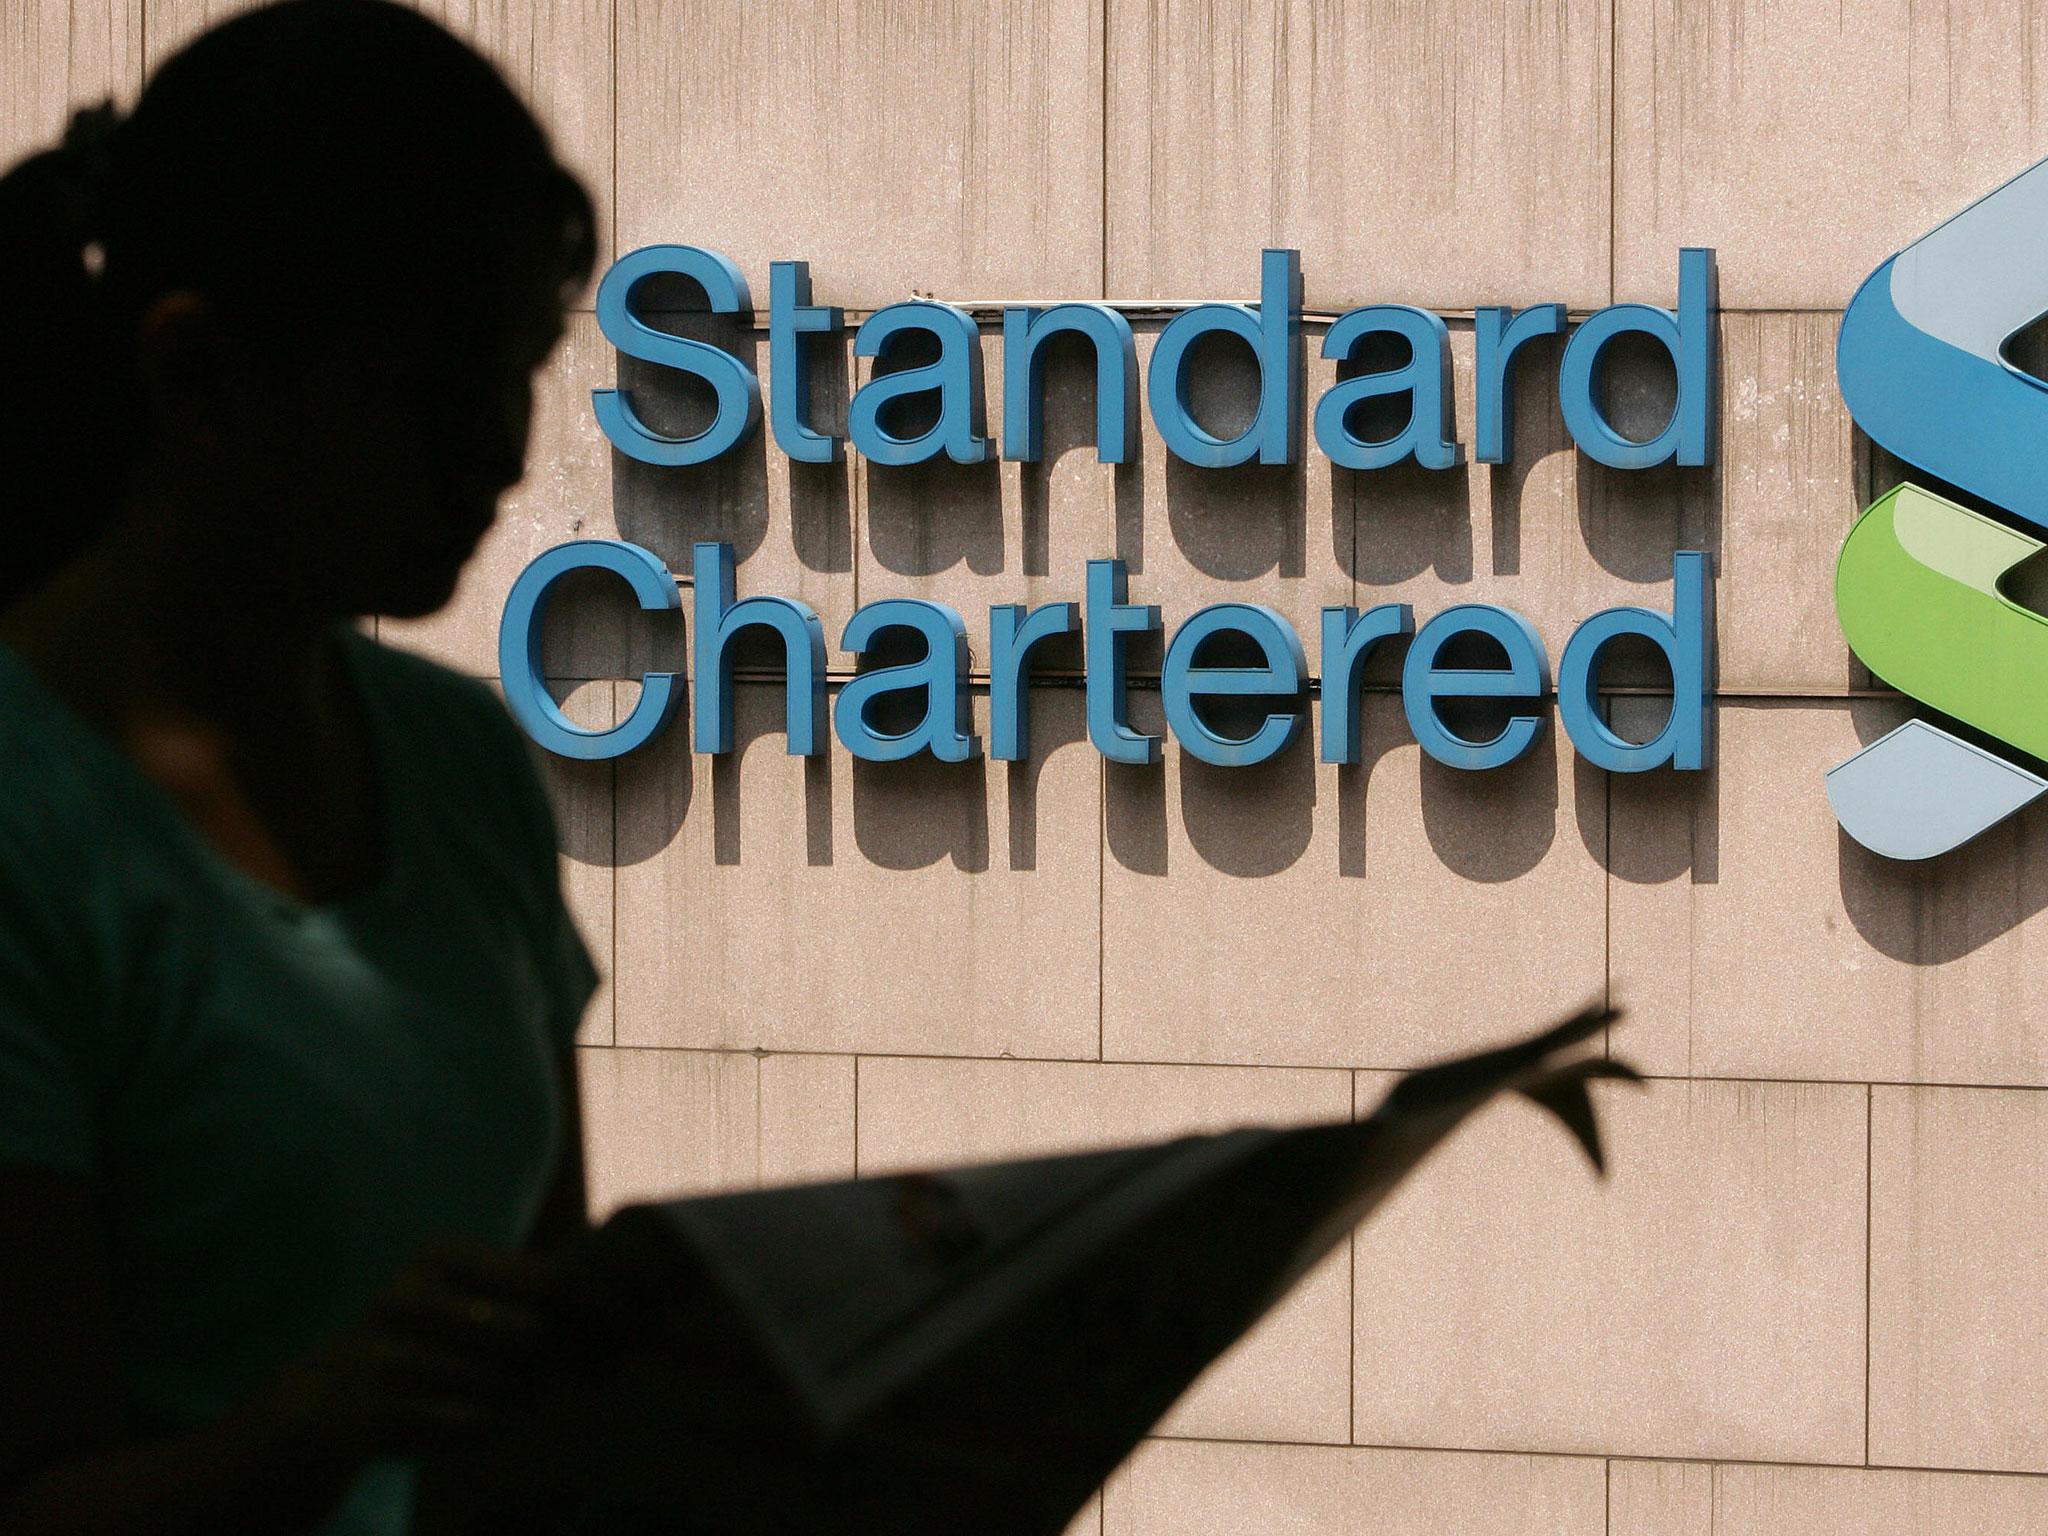 As recently as December, Standard Chartered had been edging toward picking Dublin for its new legal base inside the EU